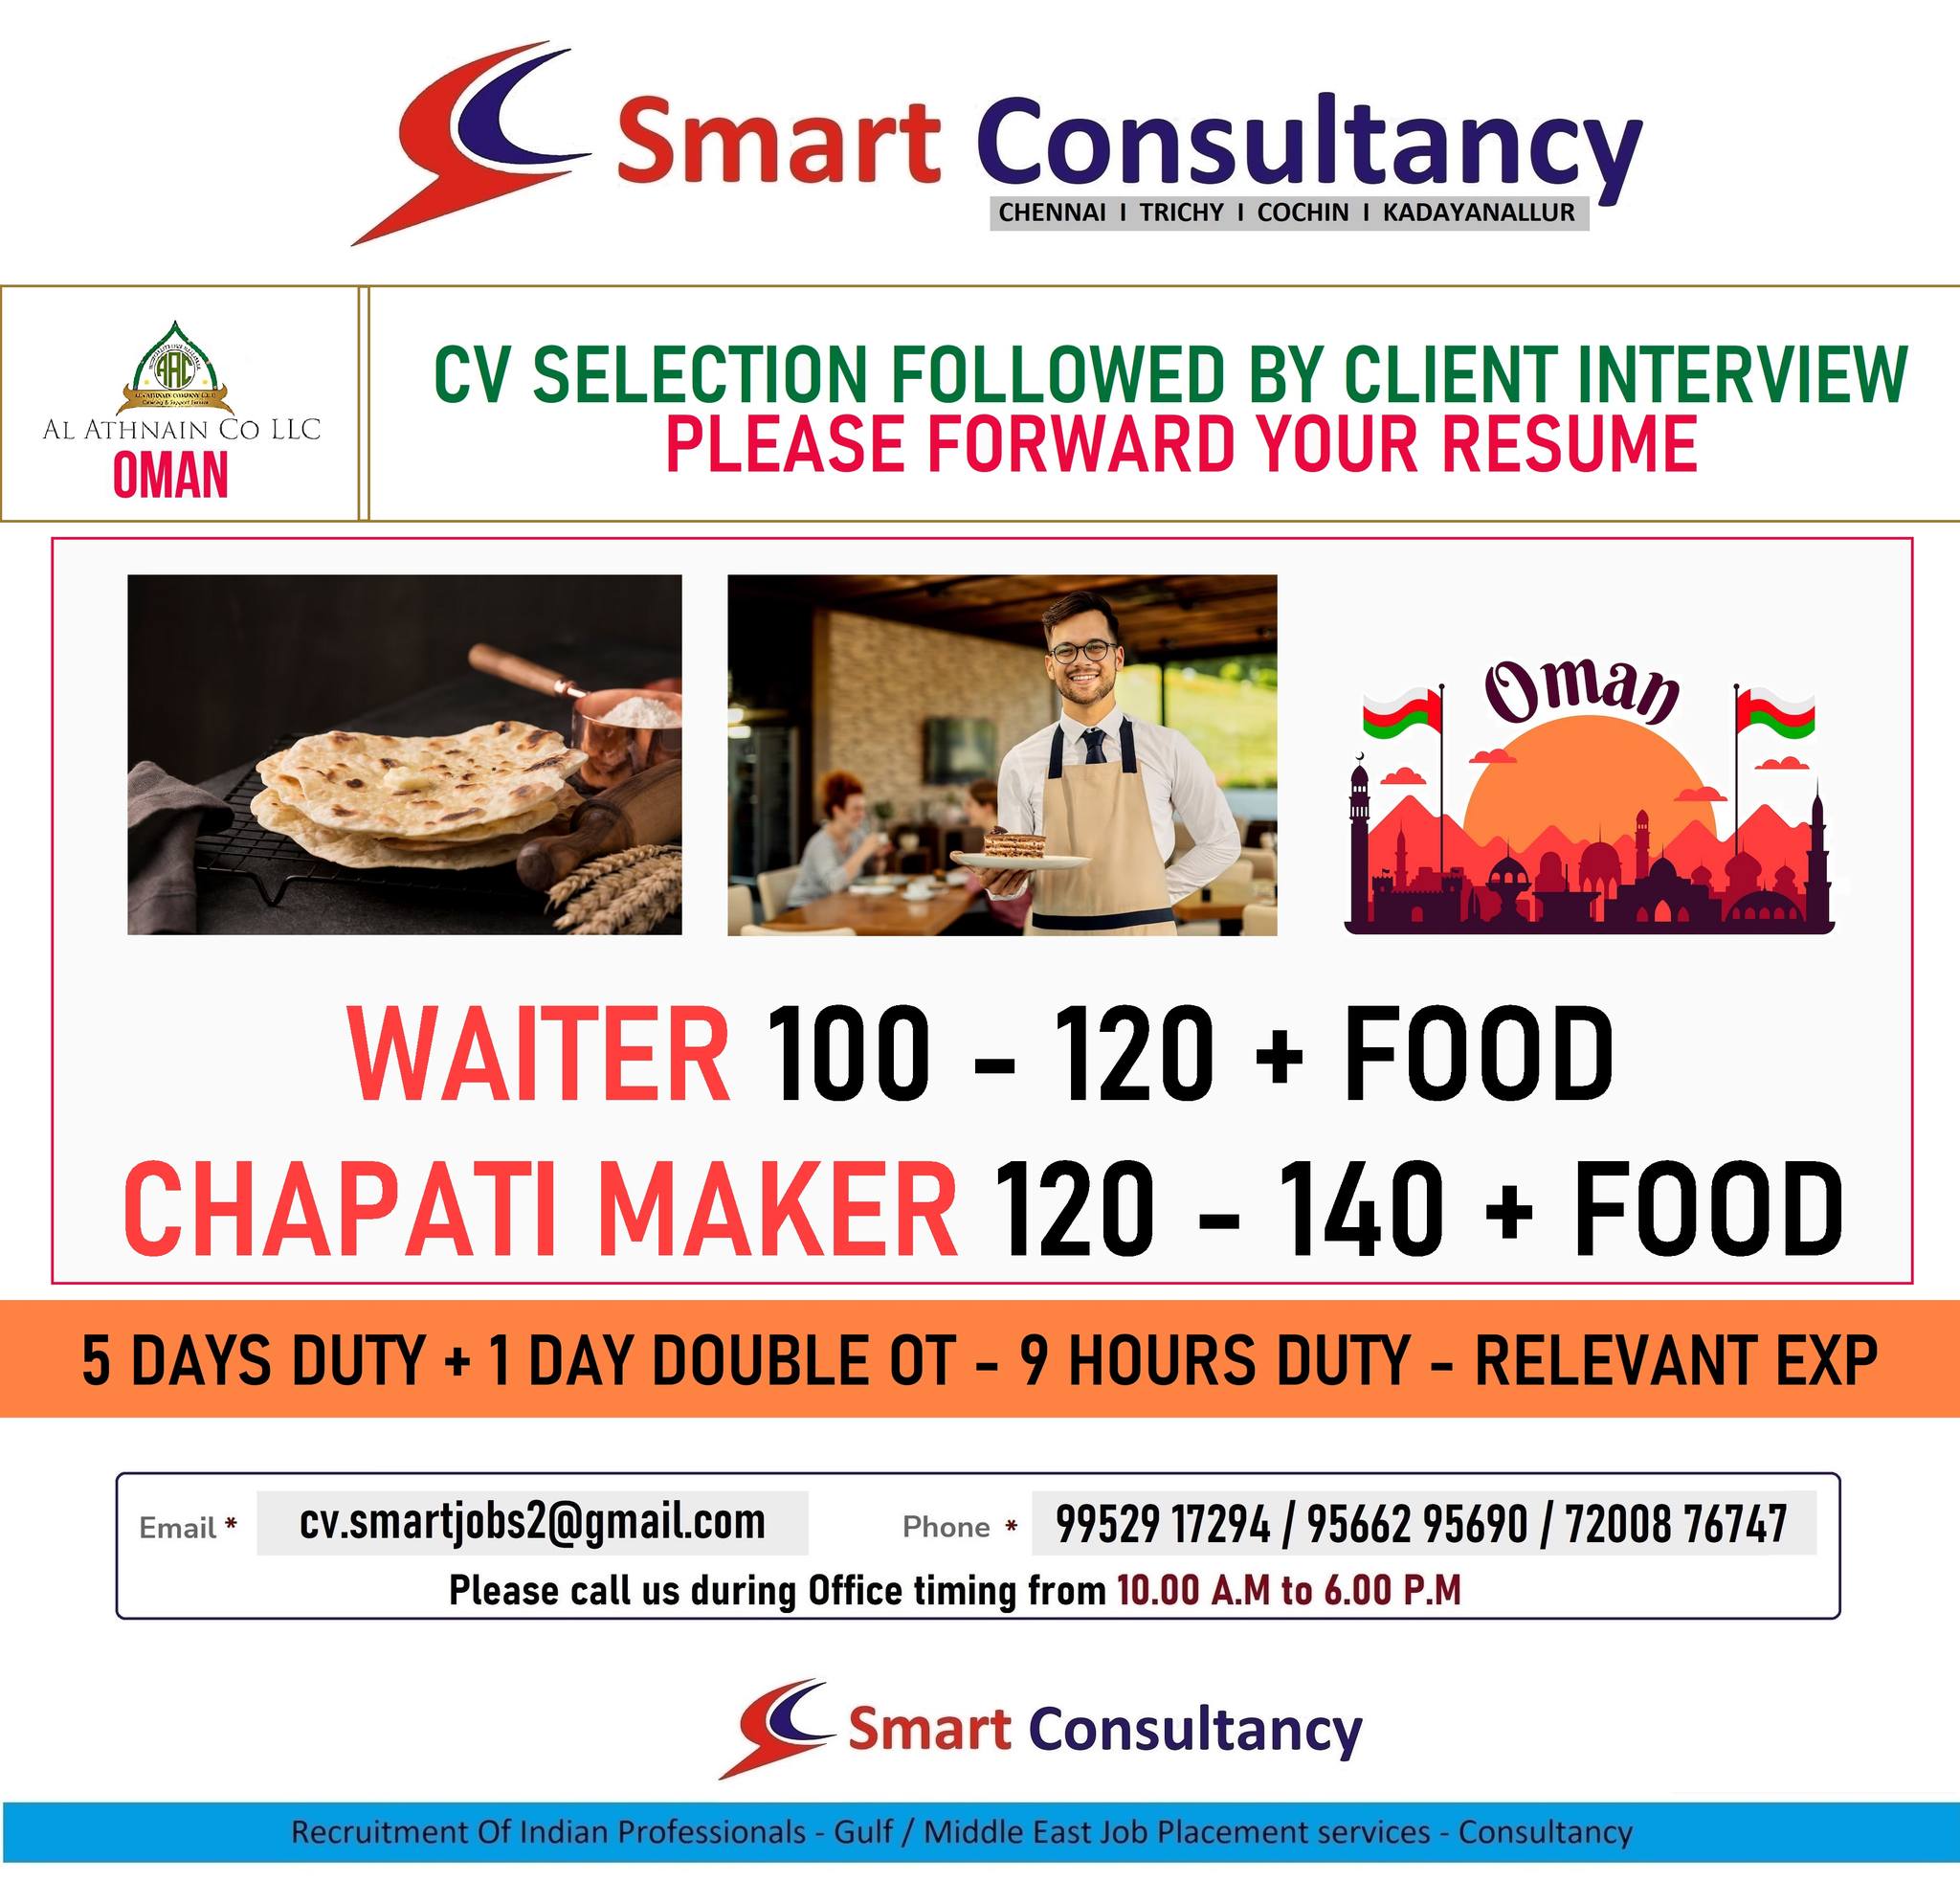 AL ATHNAIN (OMAN) – CV SELECTION FOLLOWED BY CLIENT INTERVIEW